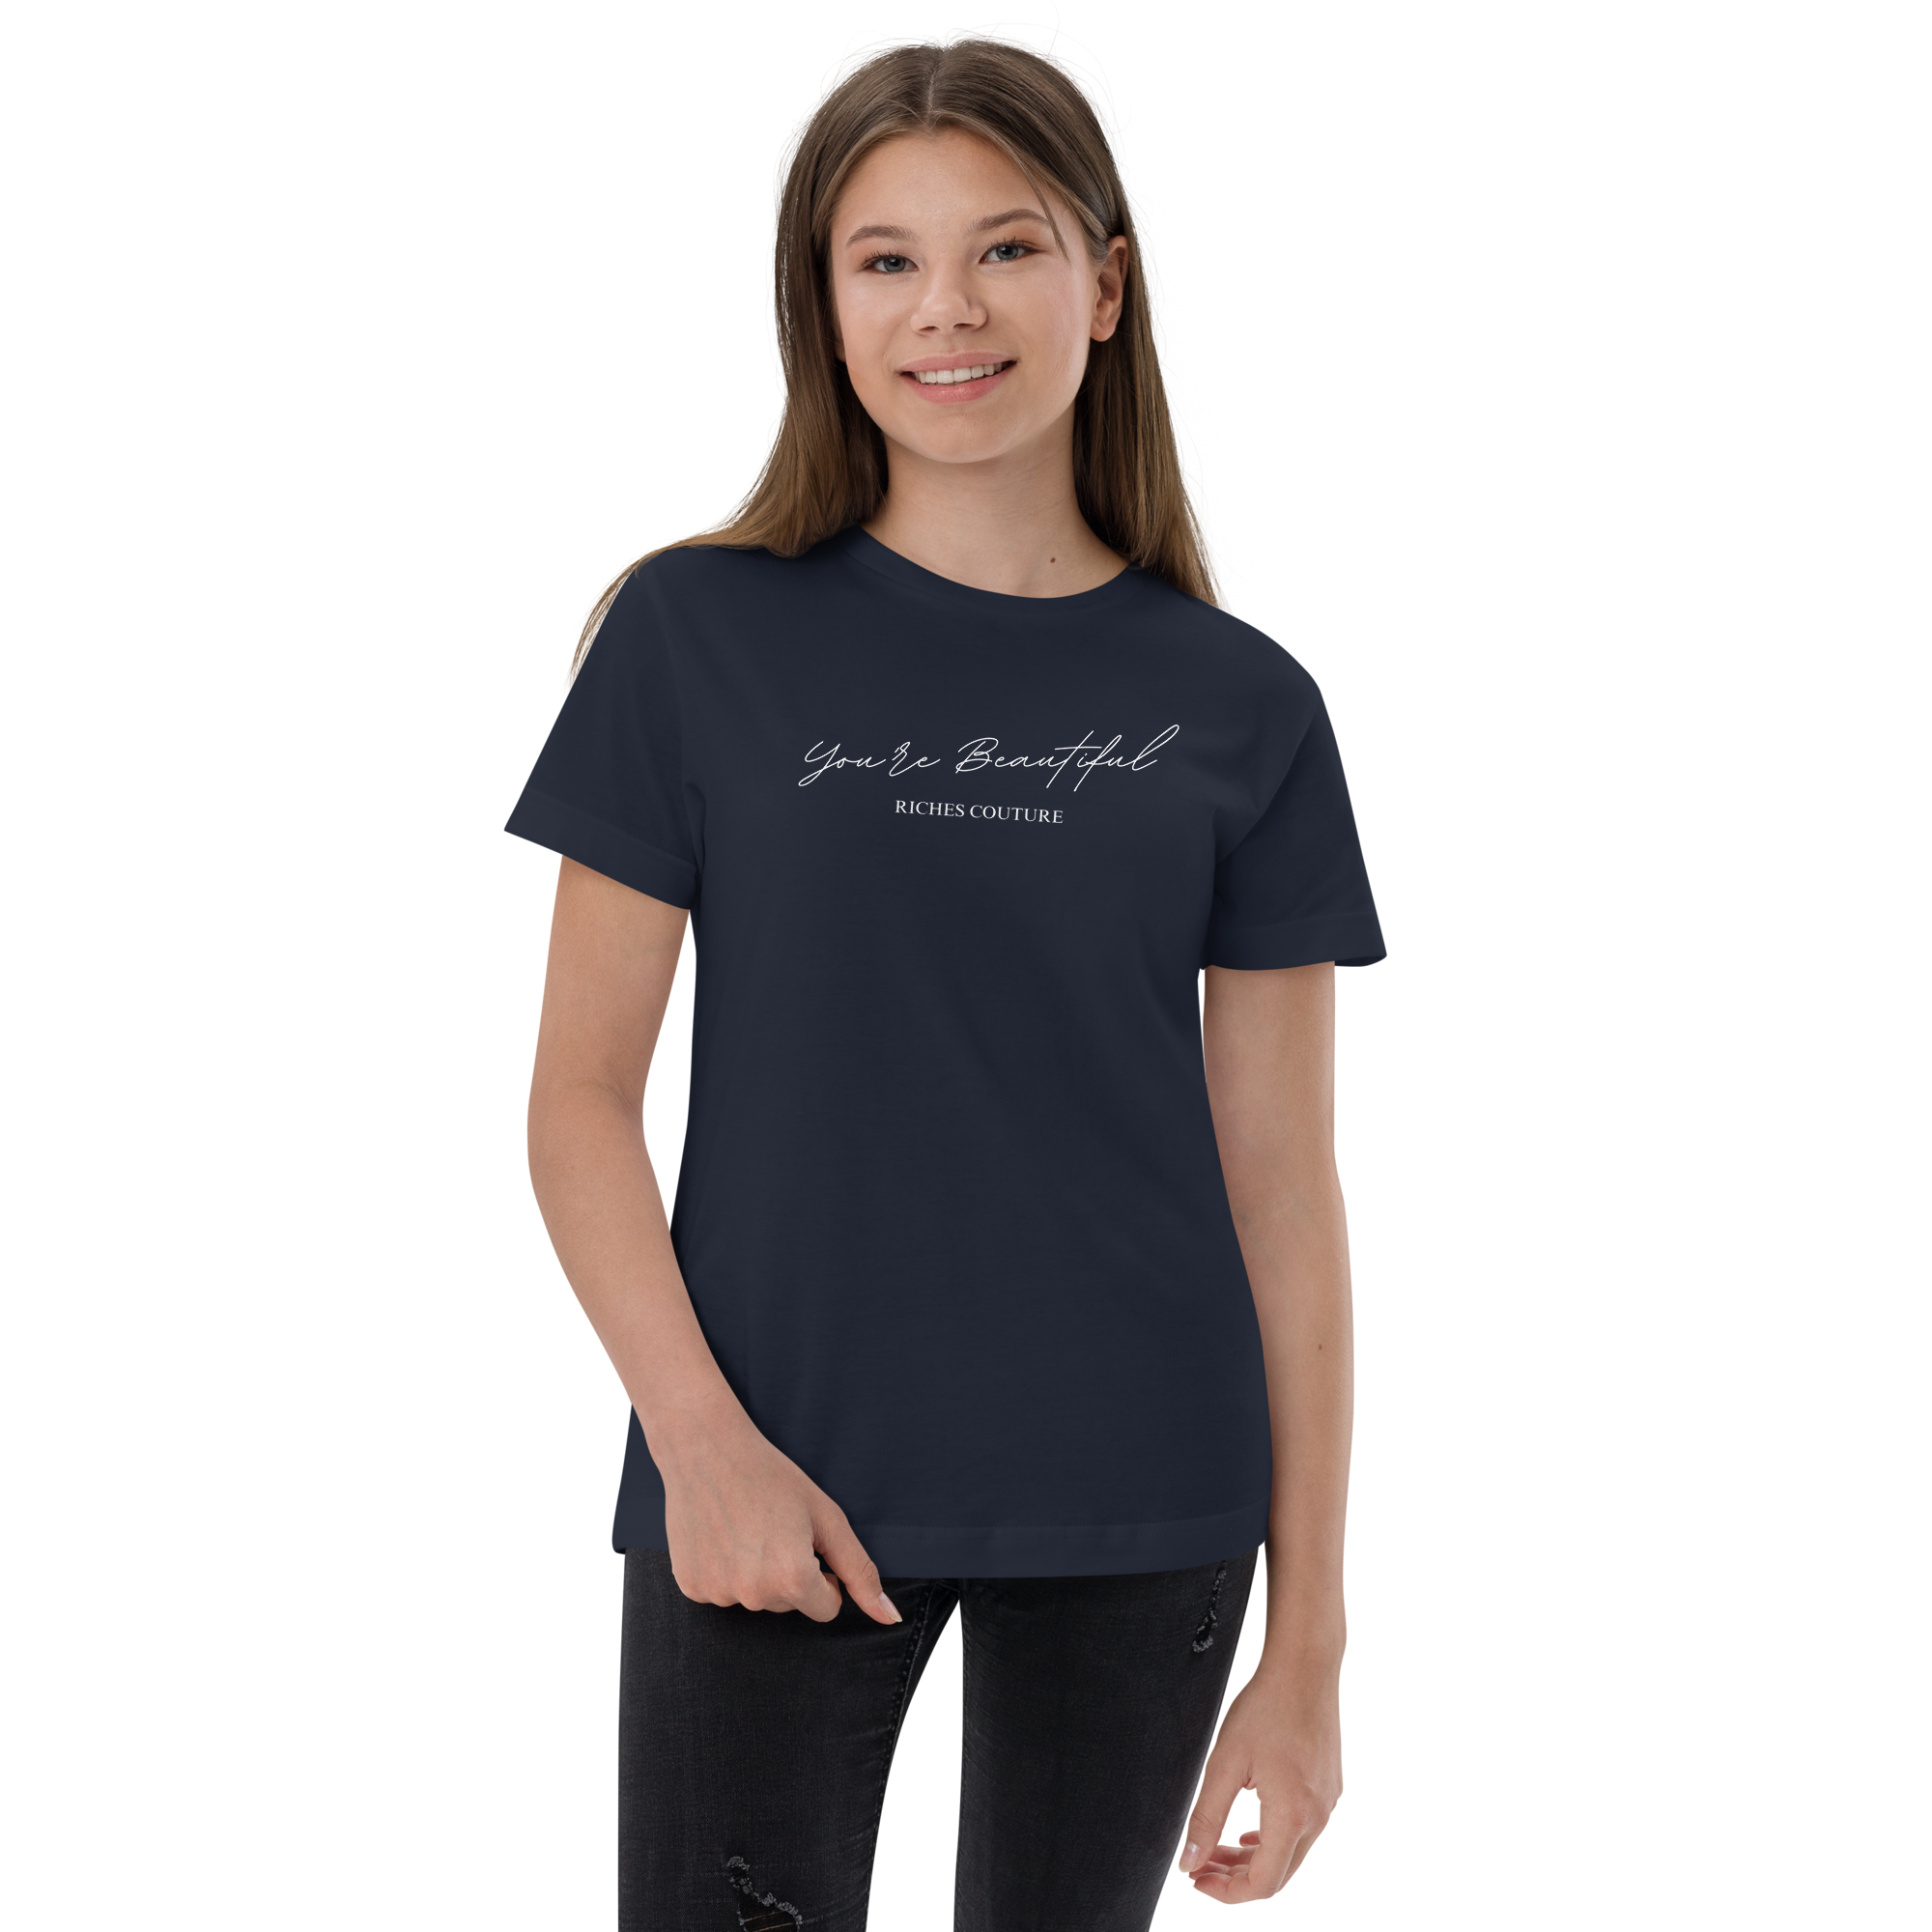  Riches Couture classic youth jersey t-shirt is soft and comfy dark blue